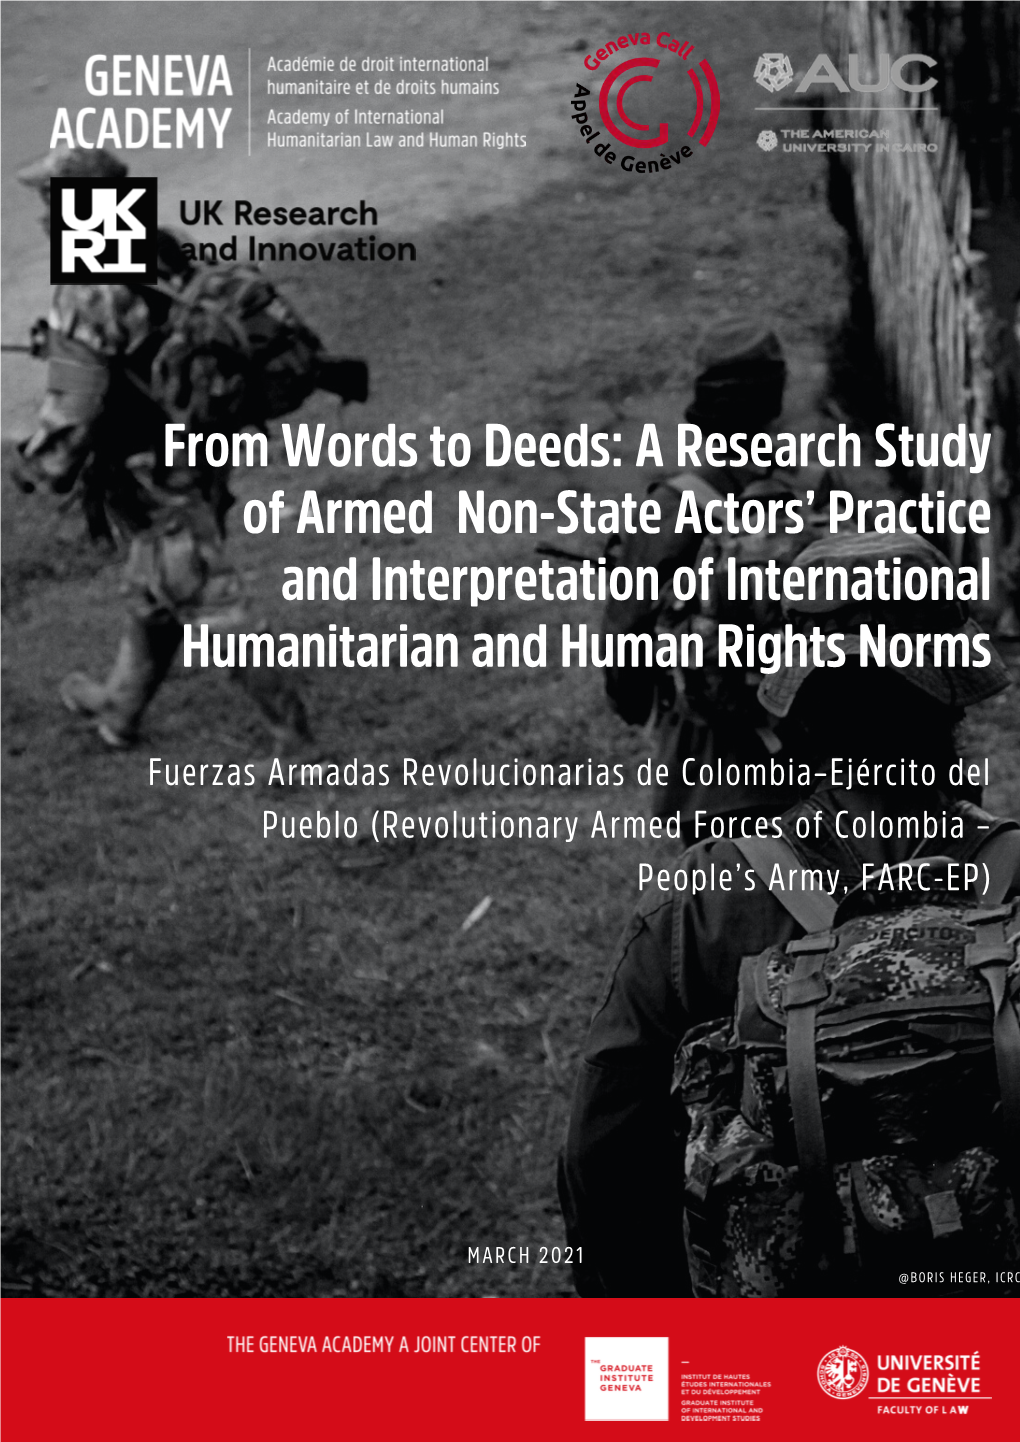 A Research Study of Armed Non-State Actors' Practice And